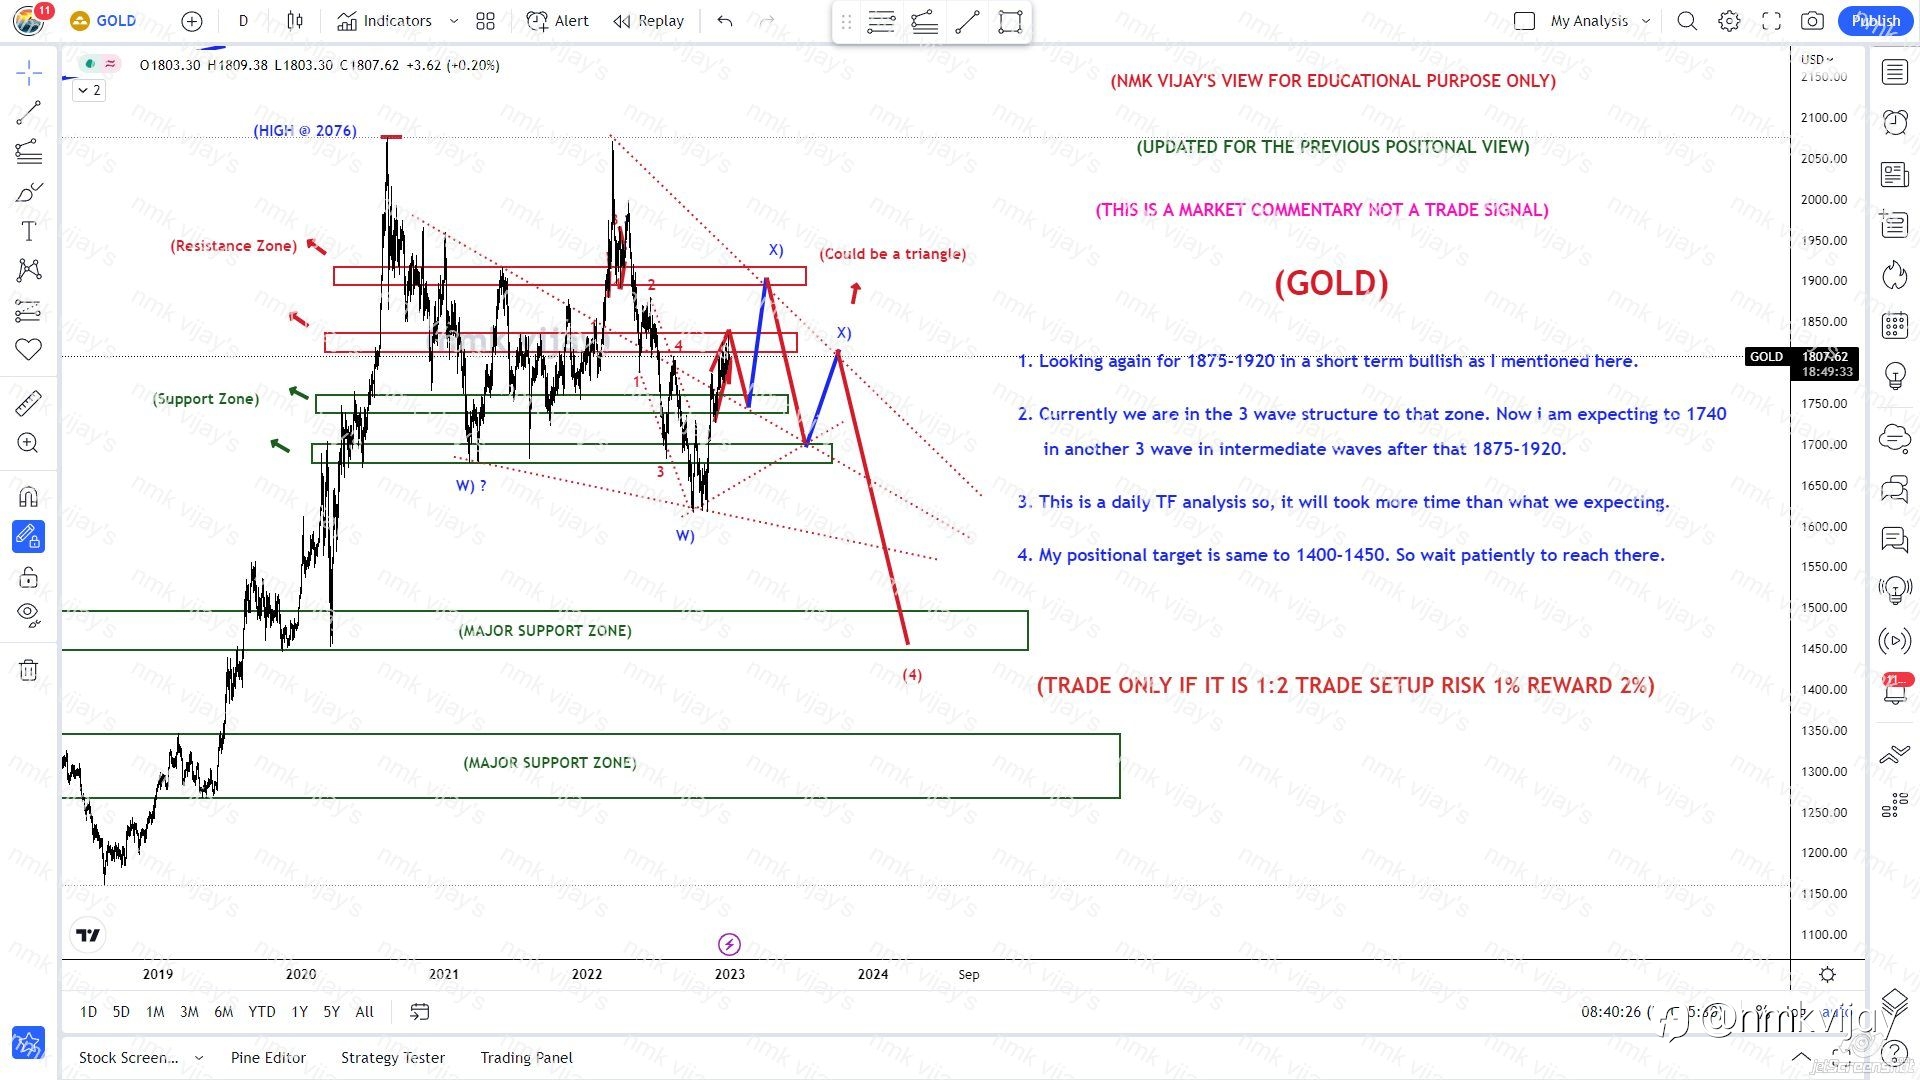 GOLD-Still my positional target to 1400-50 !!!